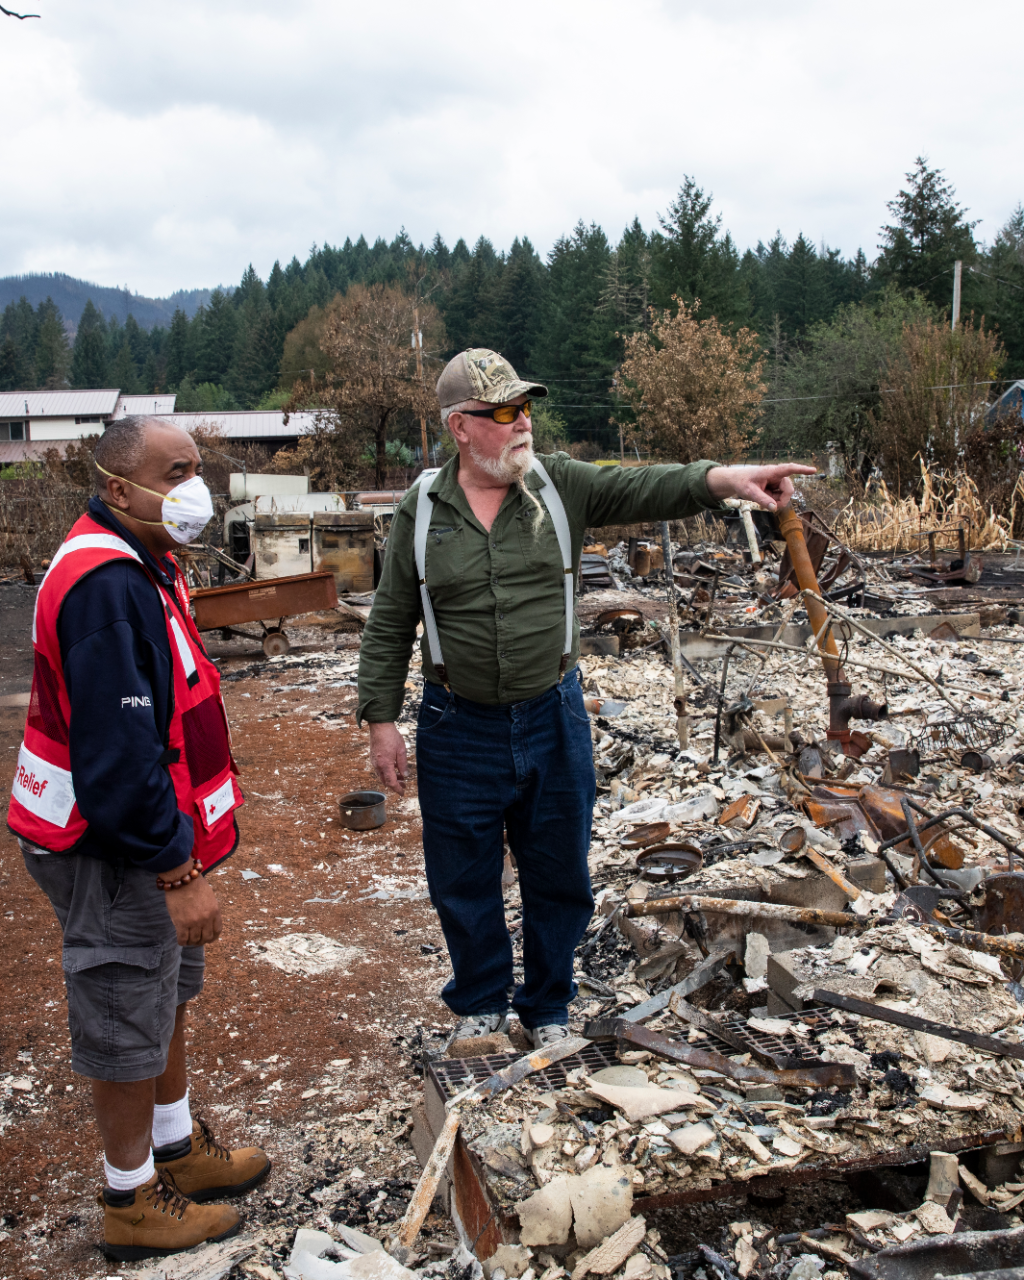 Red Cross volunteer surveying the damage caused by a disaster